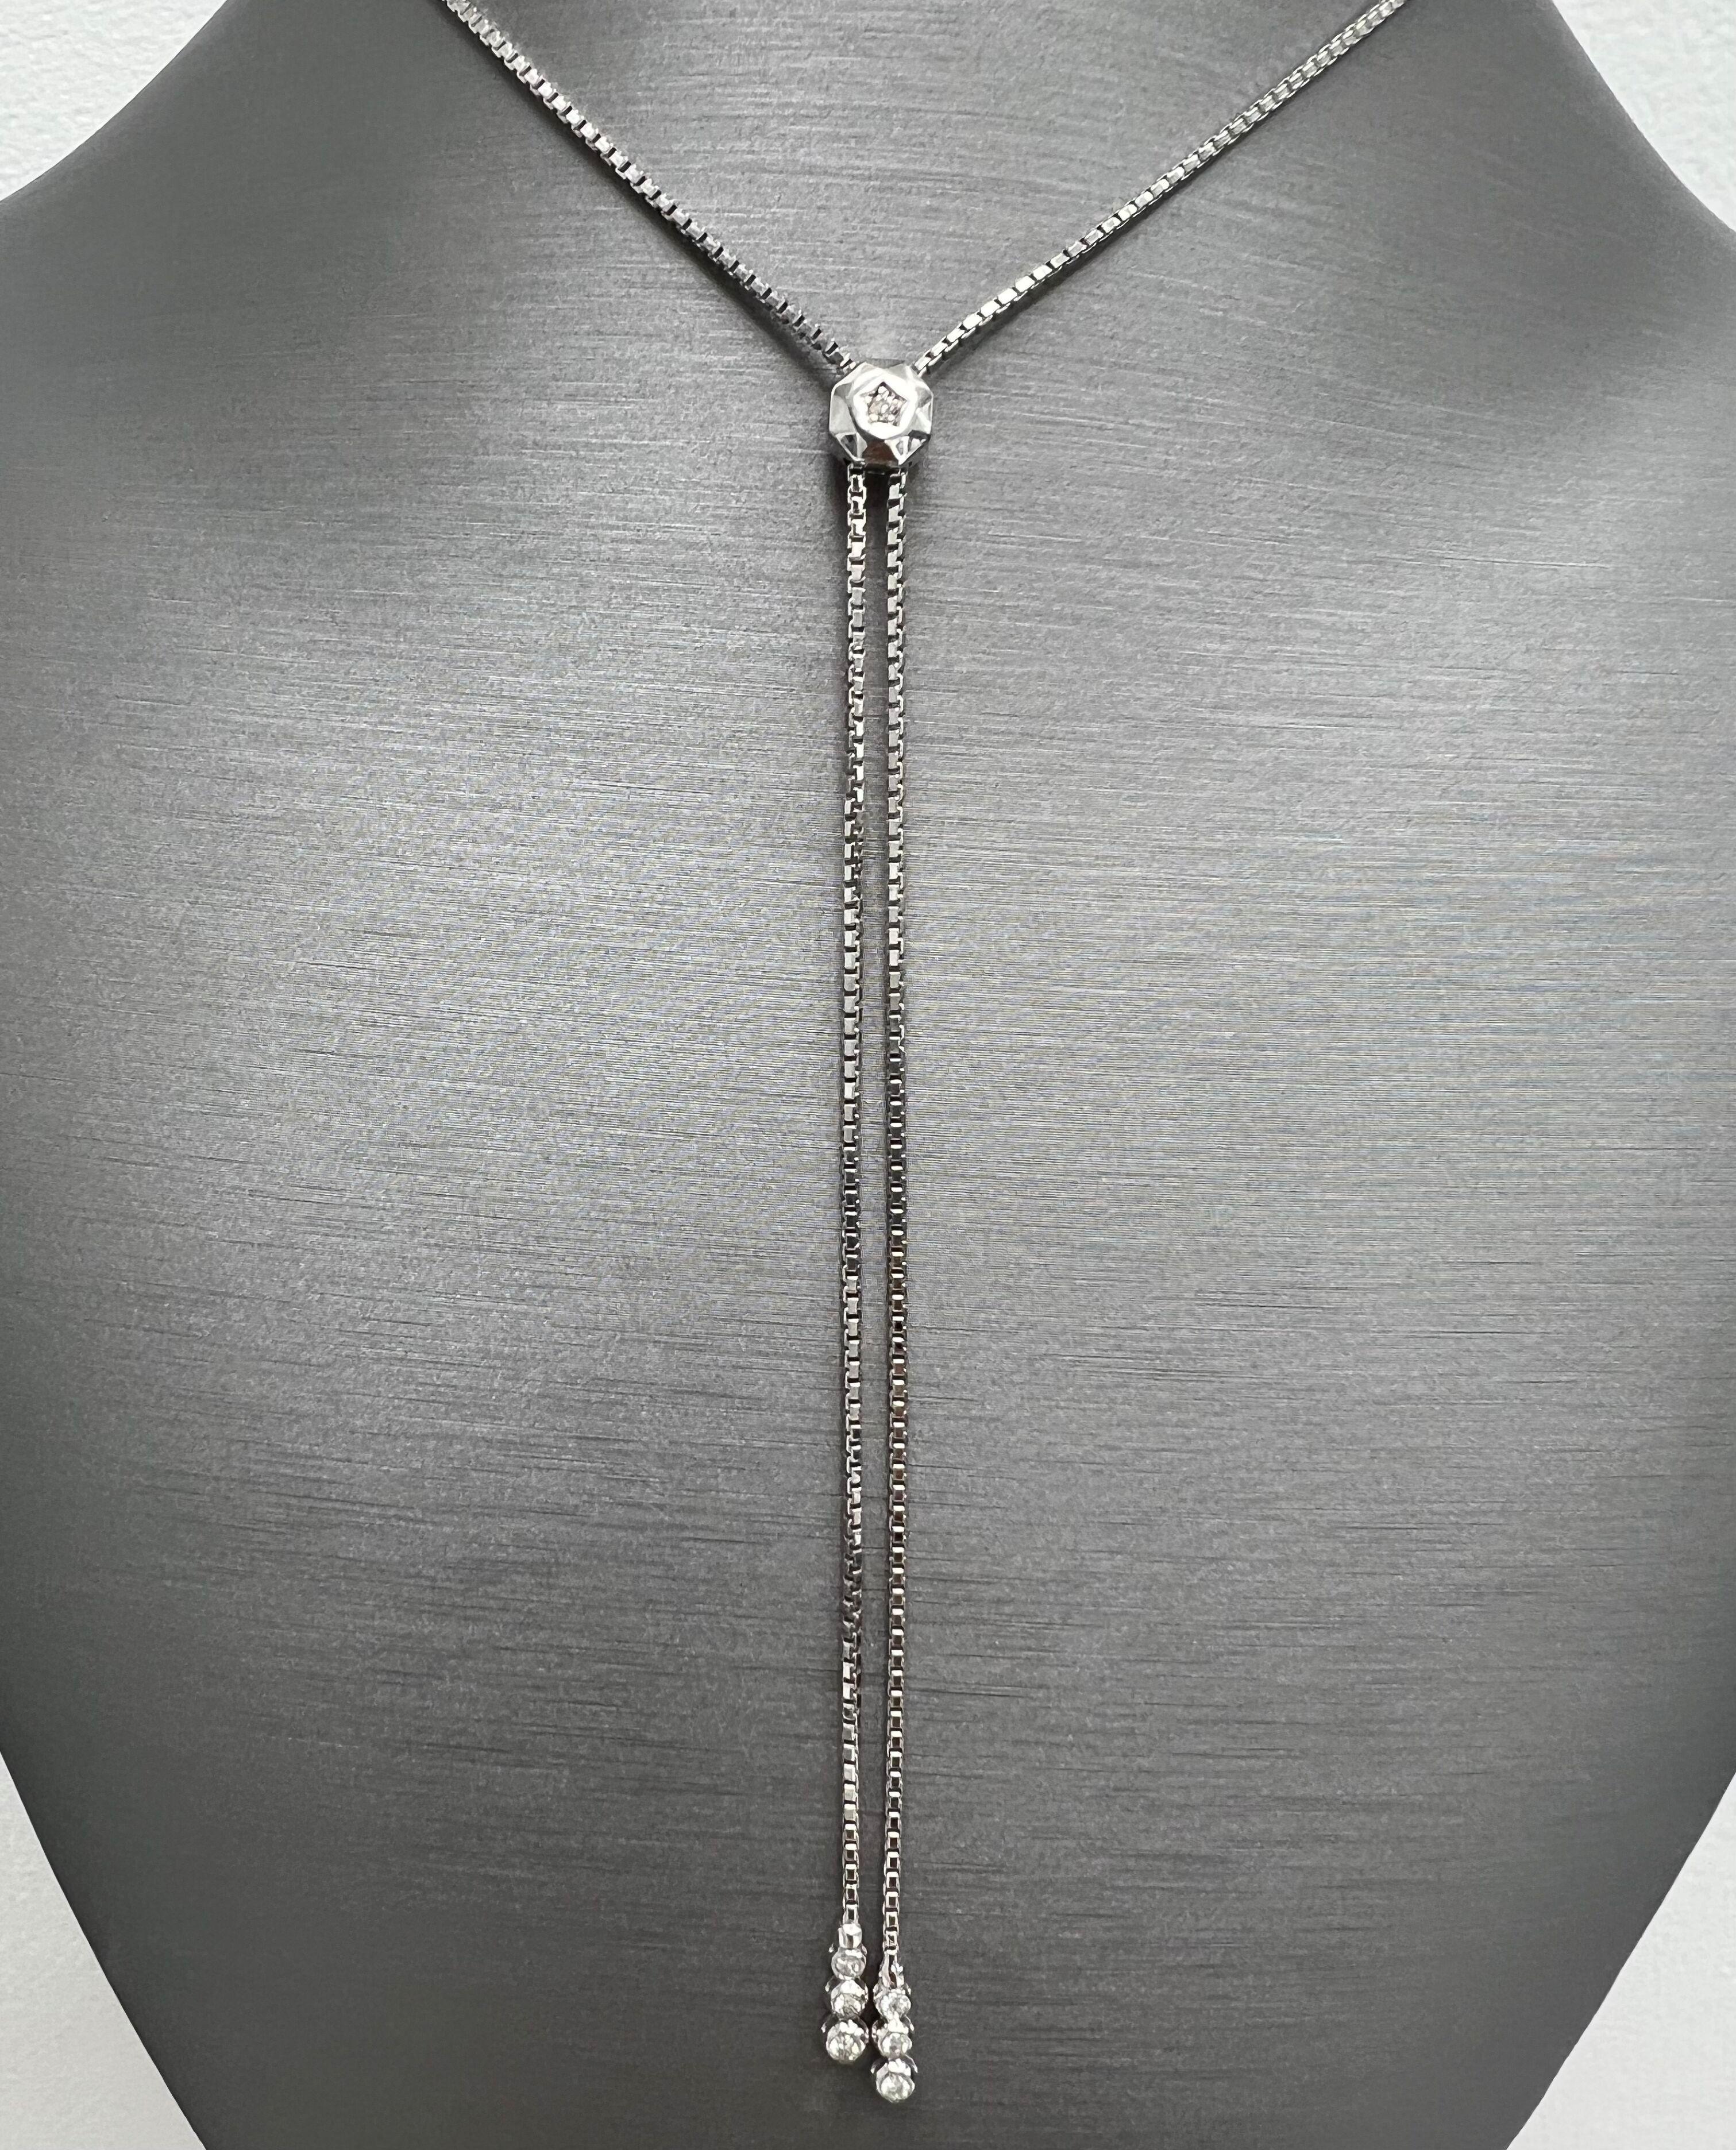 Women's or Men's 14k This Gold Diamond Necklace with Graduated Diamonds and Pull-Up Chain For Sale